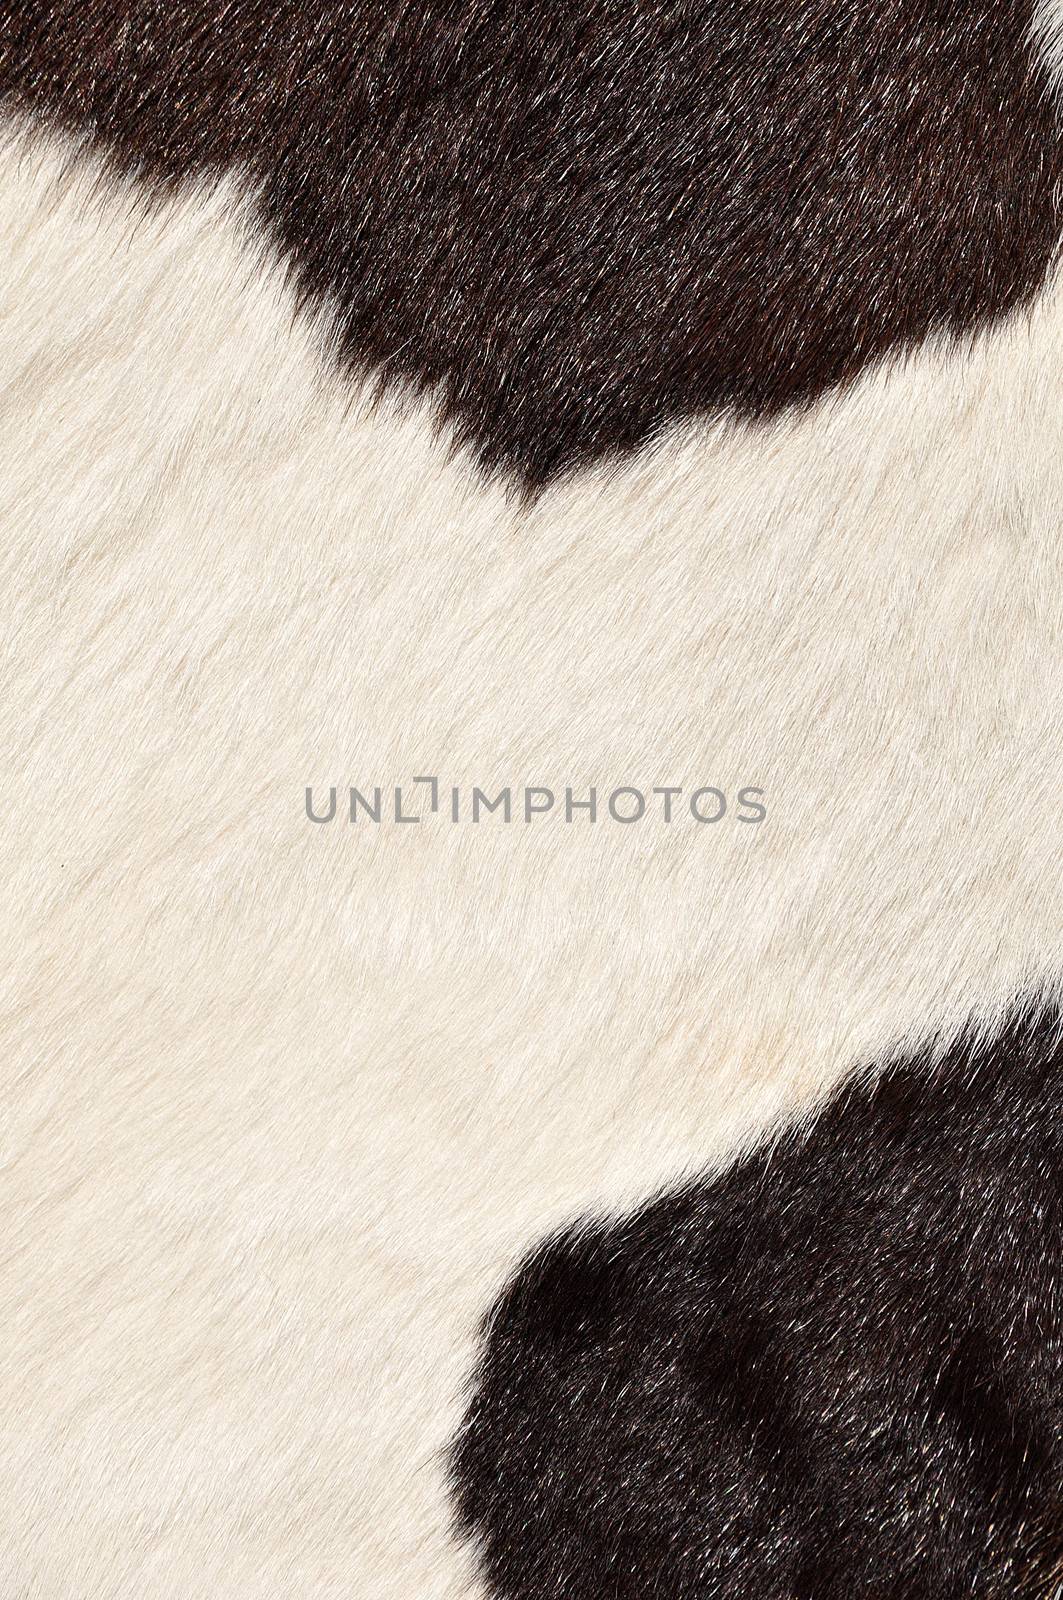 Brown and white hairy texture of cow by MaZiKab